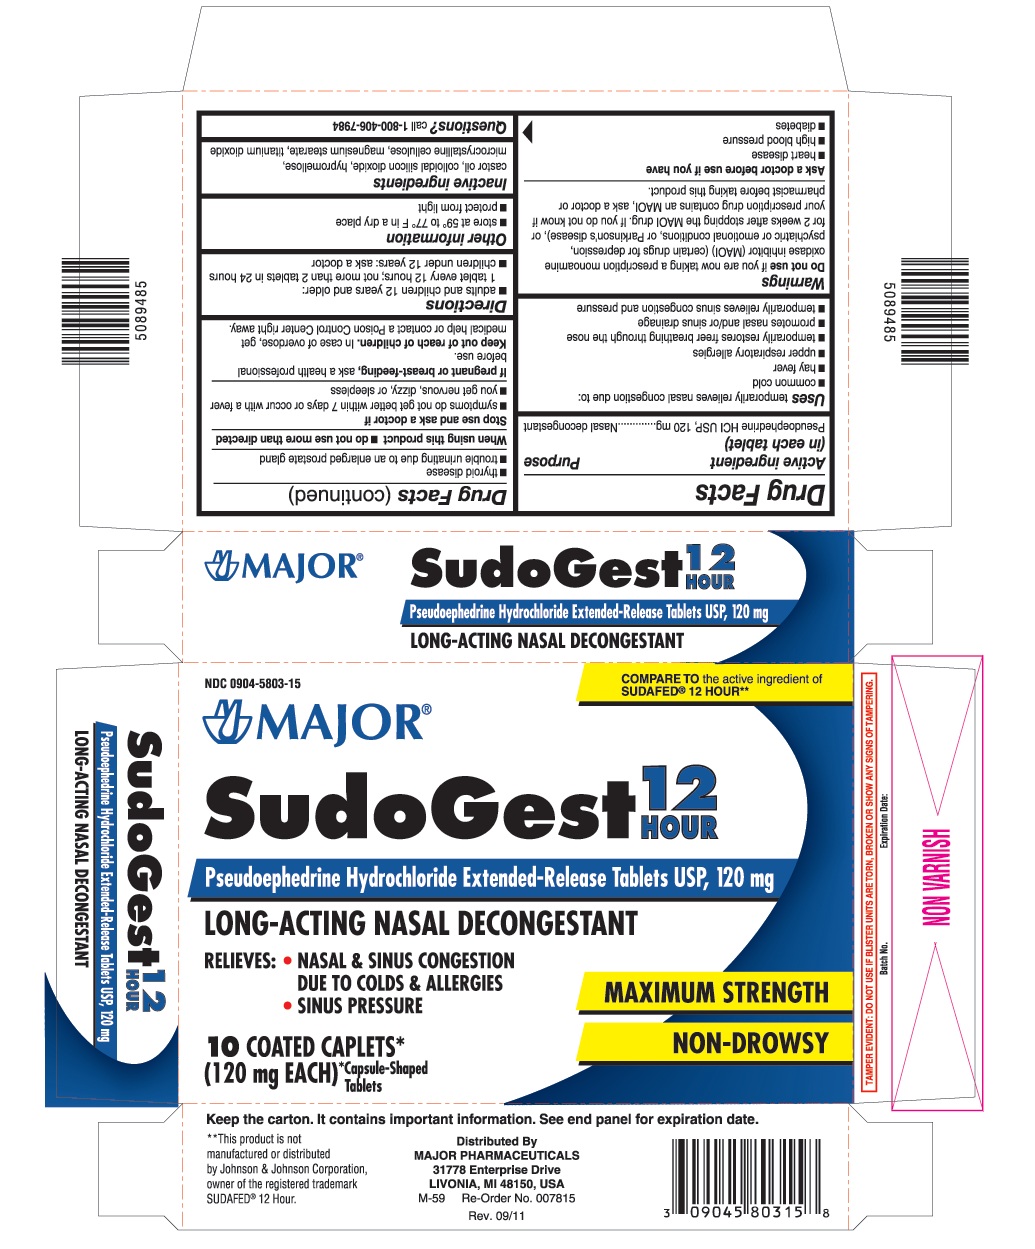 This is the 10 count blister carton label for Major SudoGest 12 hour caplets.